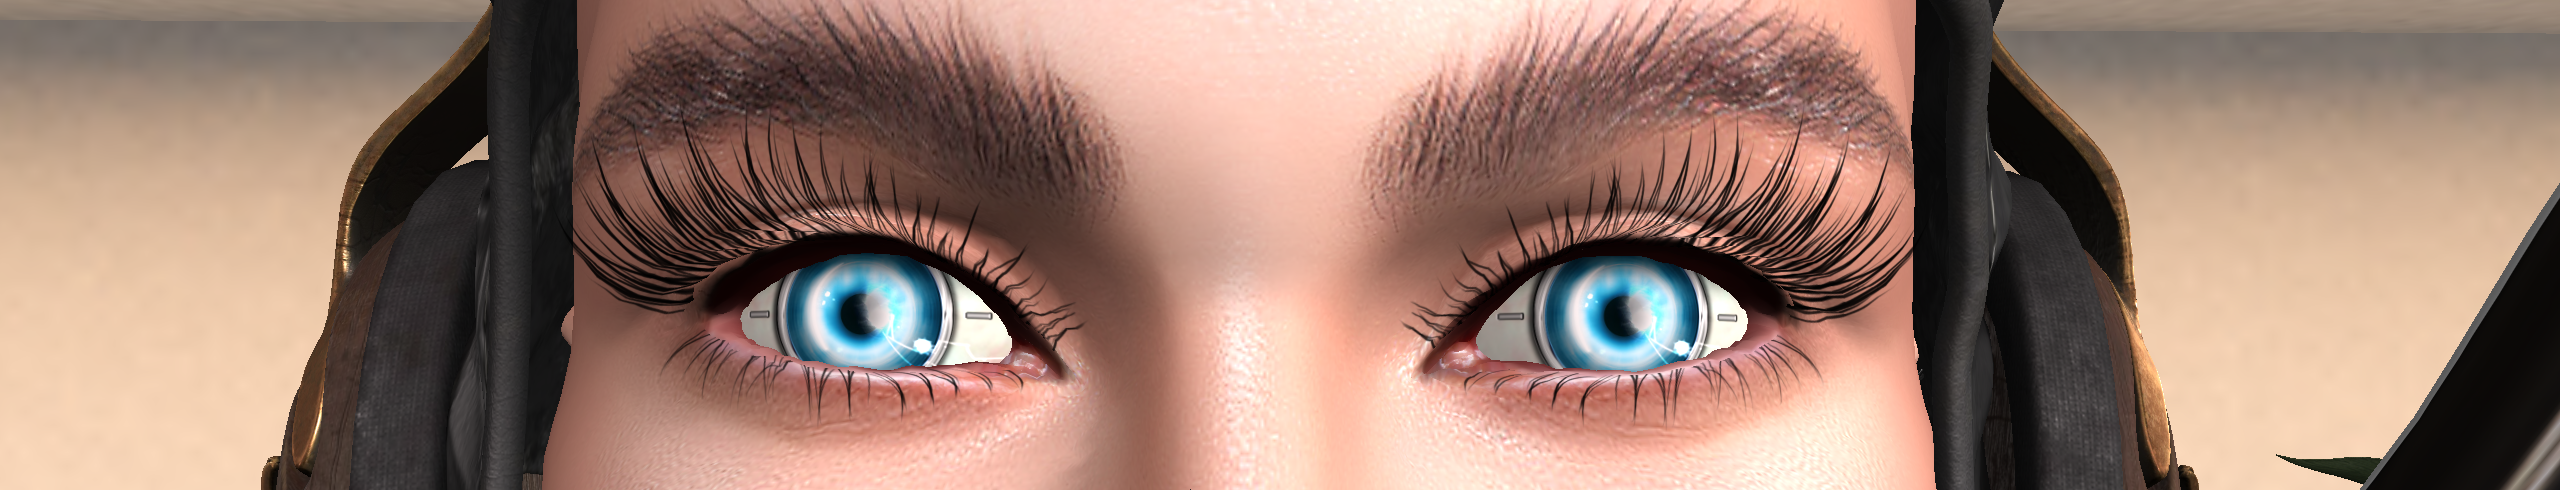 iterations Implant Eyes release